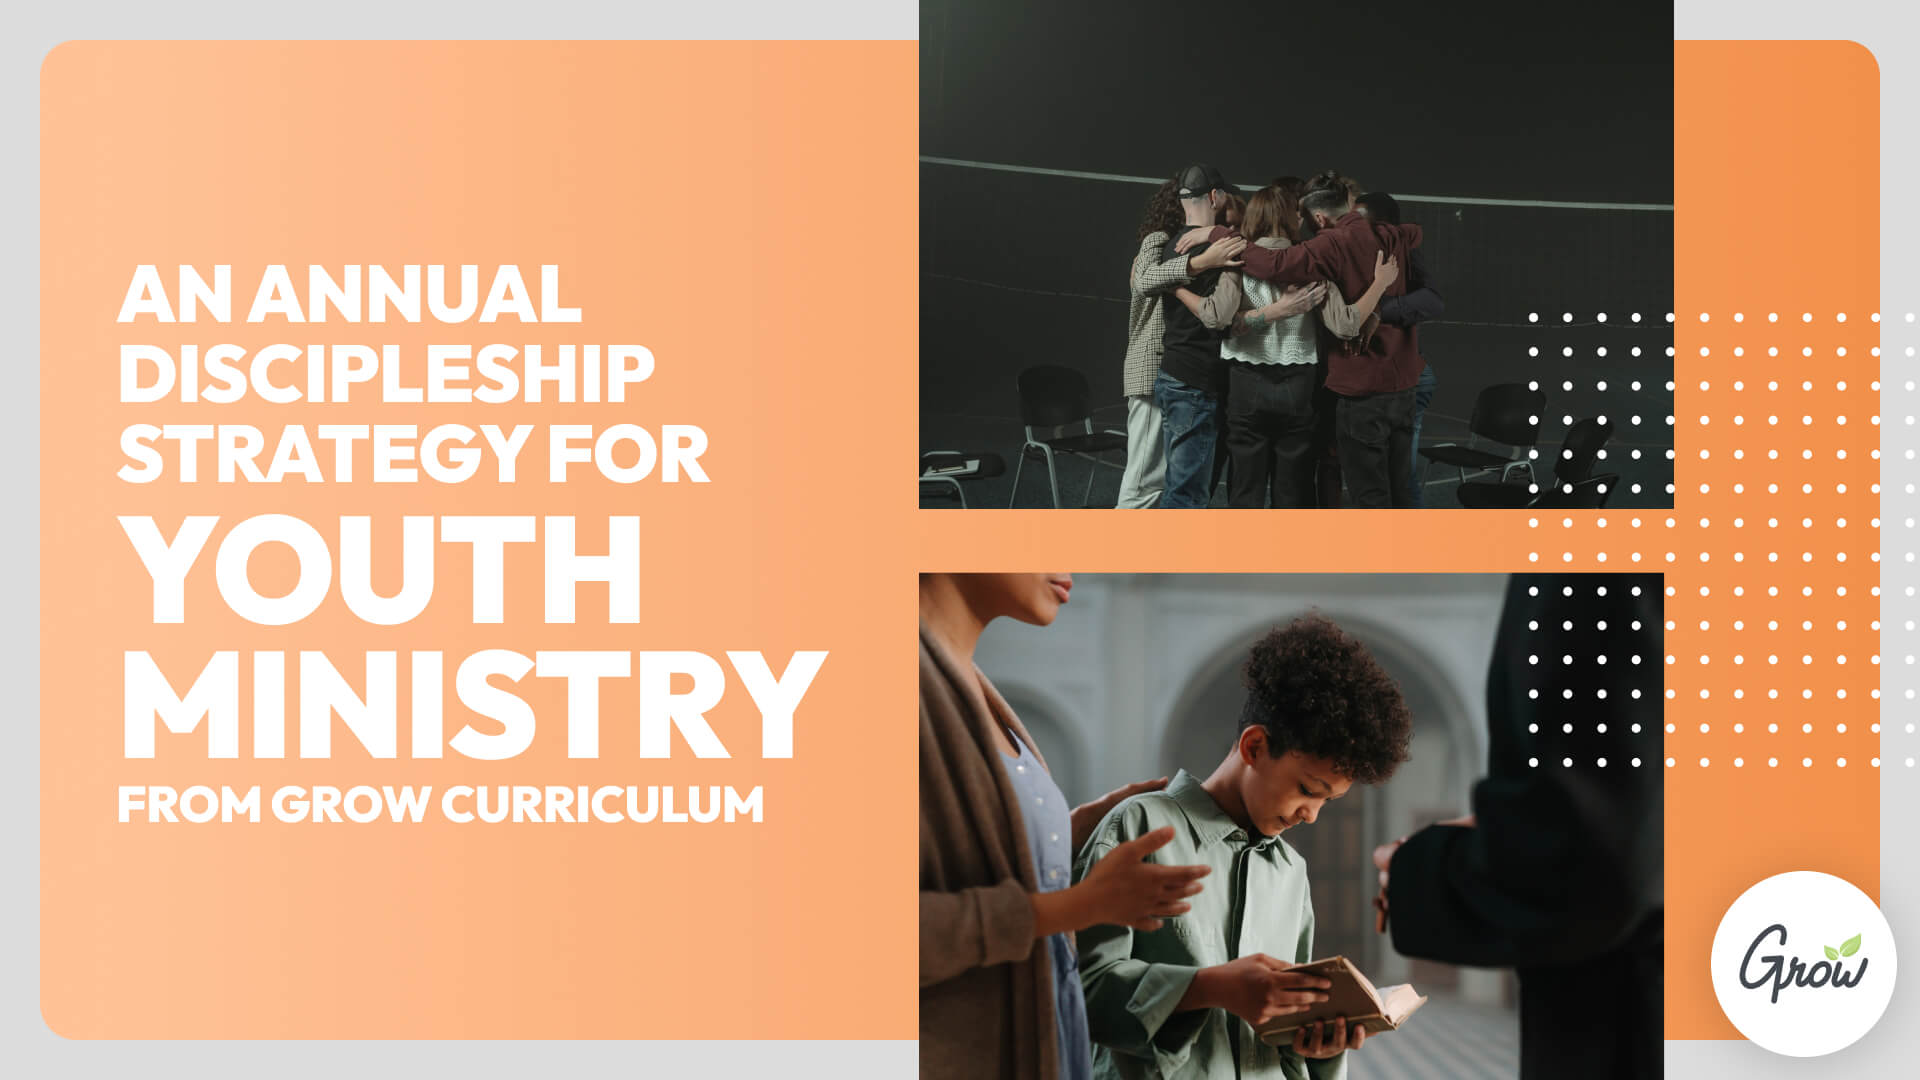 An Annual Discipleship Strategy for Youth Ministry from Grow Curriculum